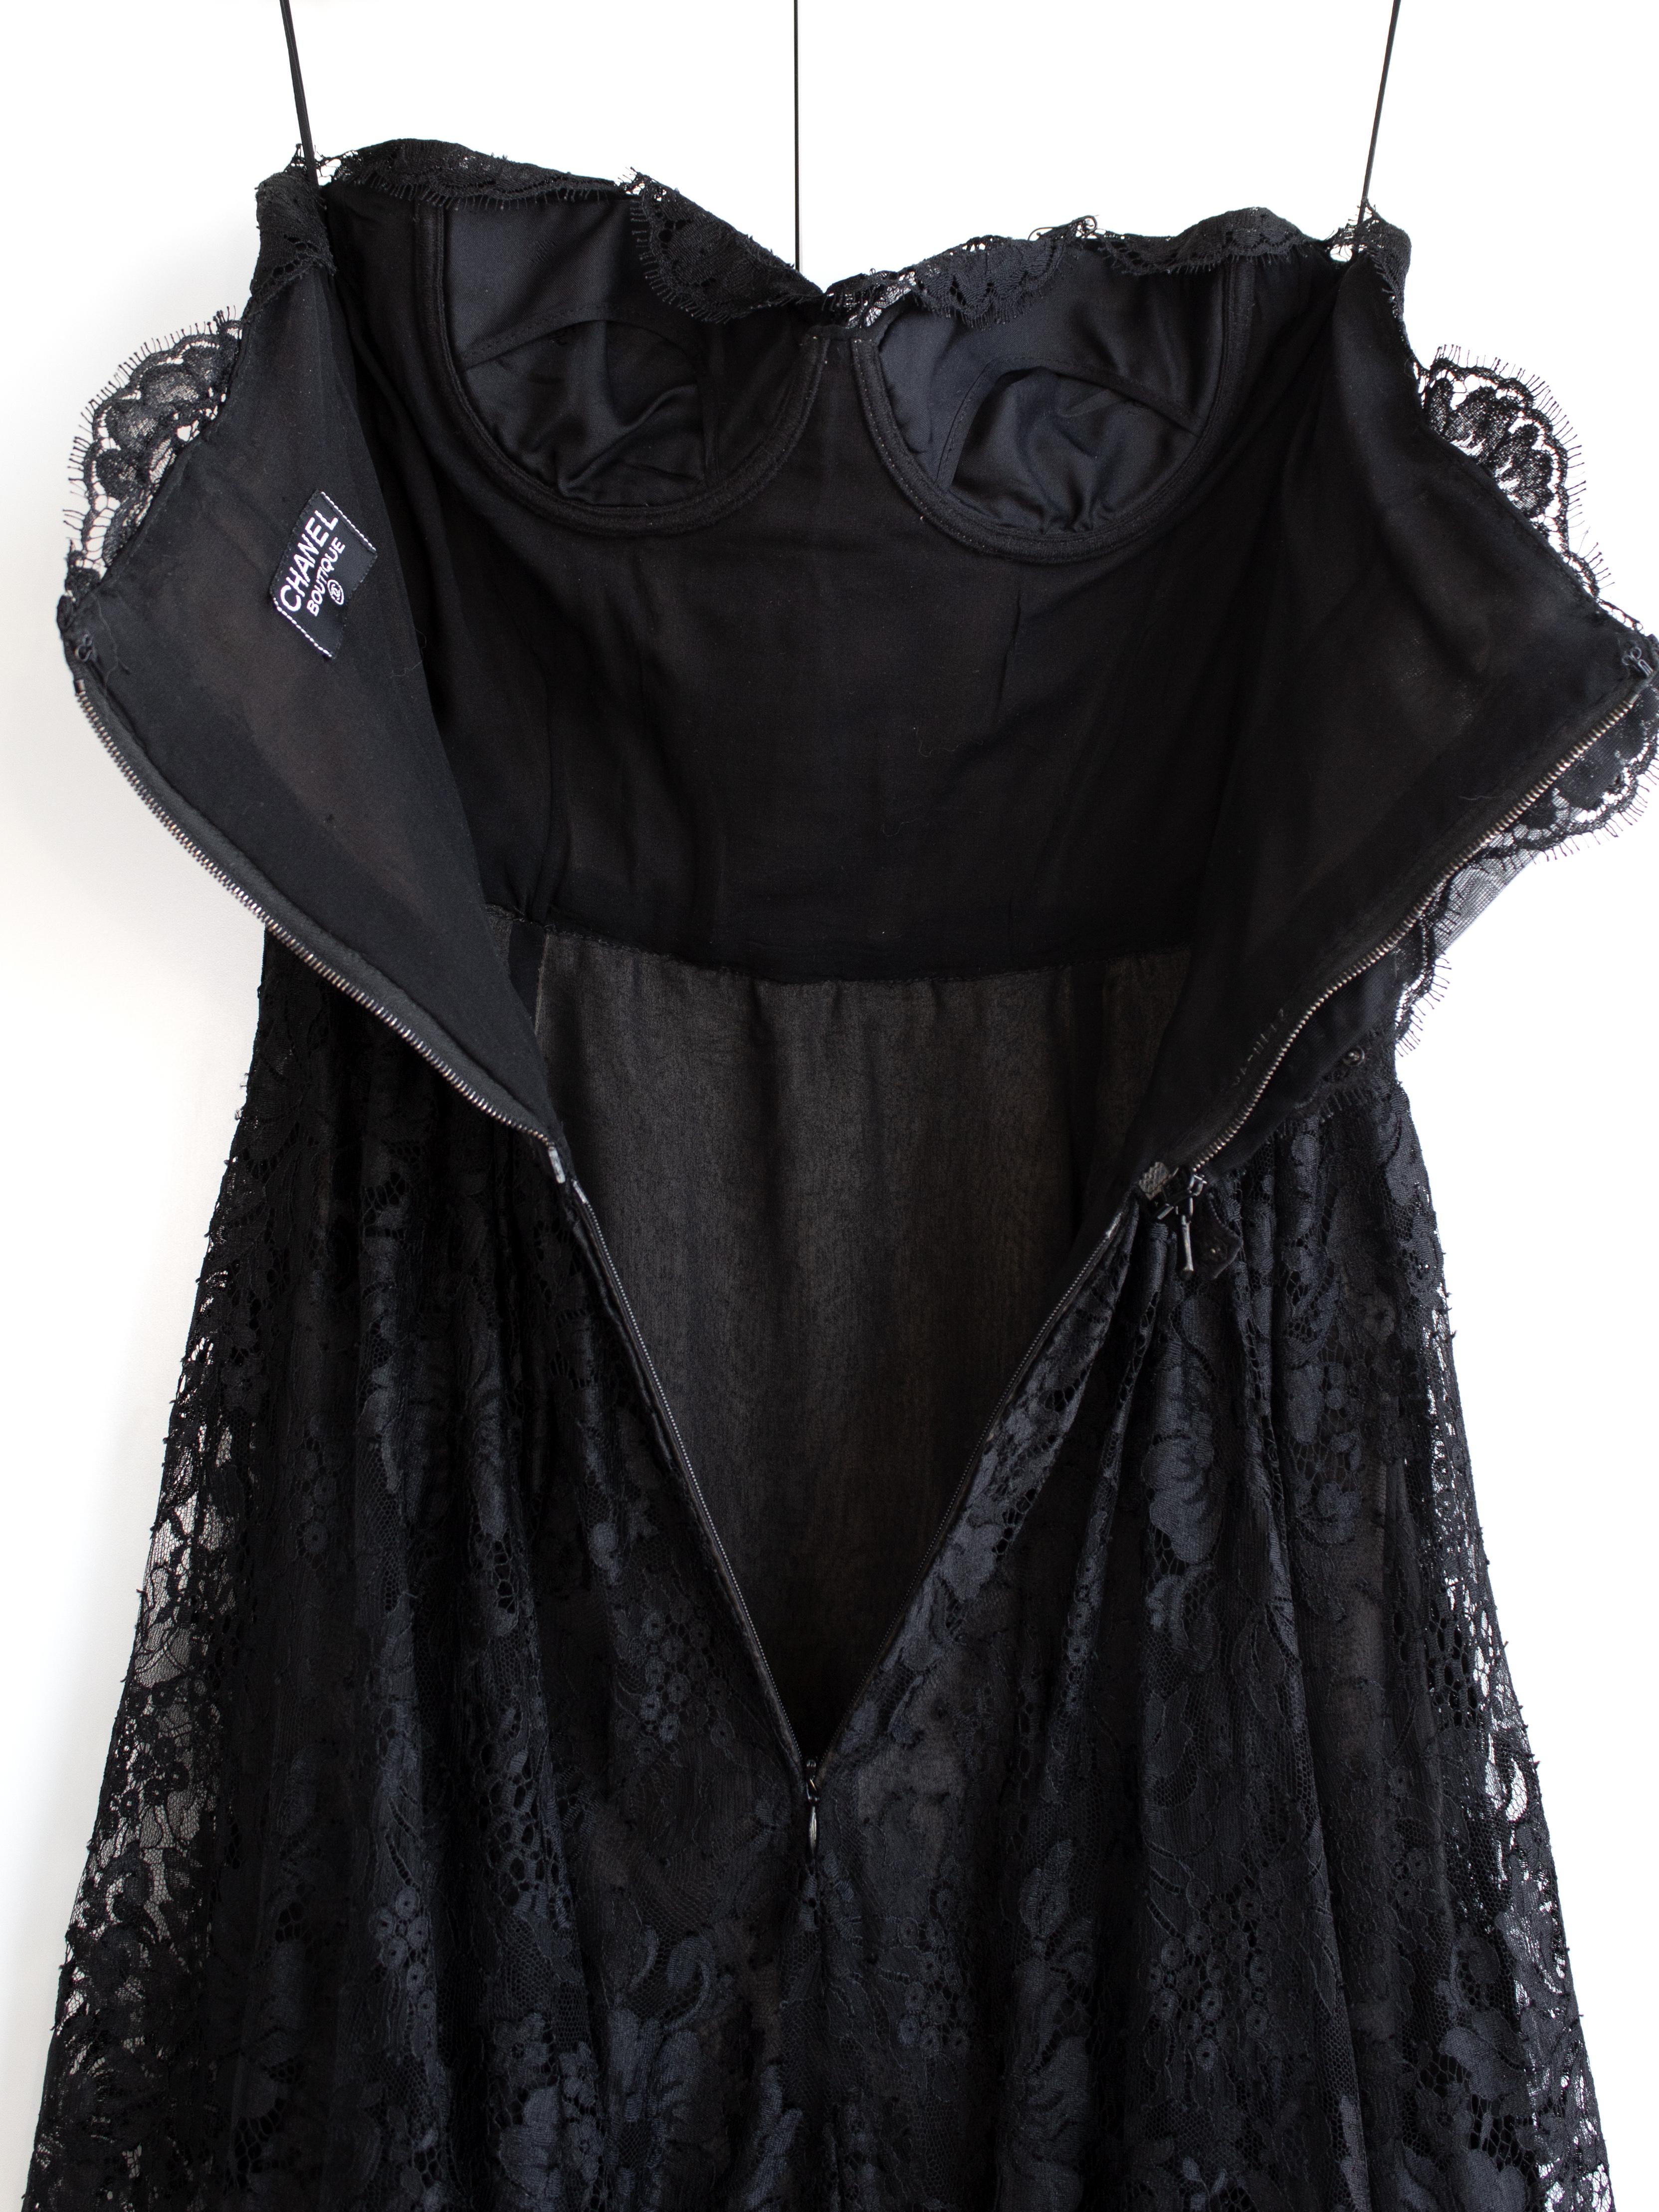 Chanel Vintage Fall 1995 Black Floral Lace Sweetheart Bustier LBD 95A Dress 7